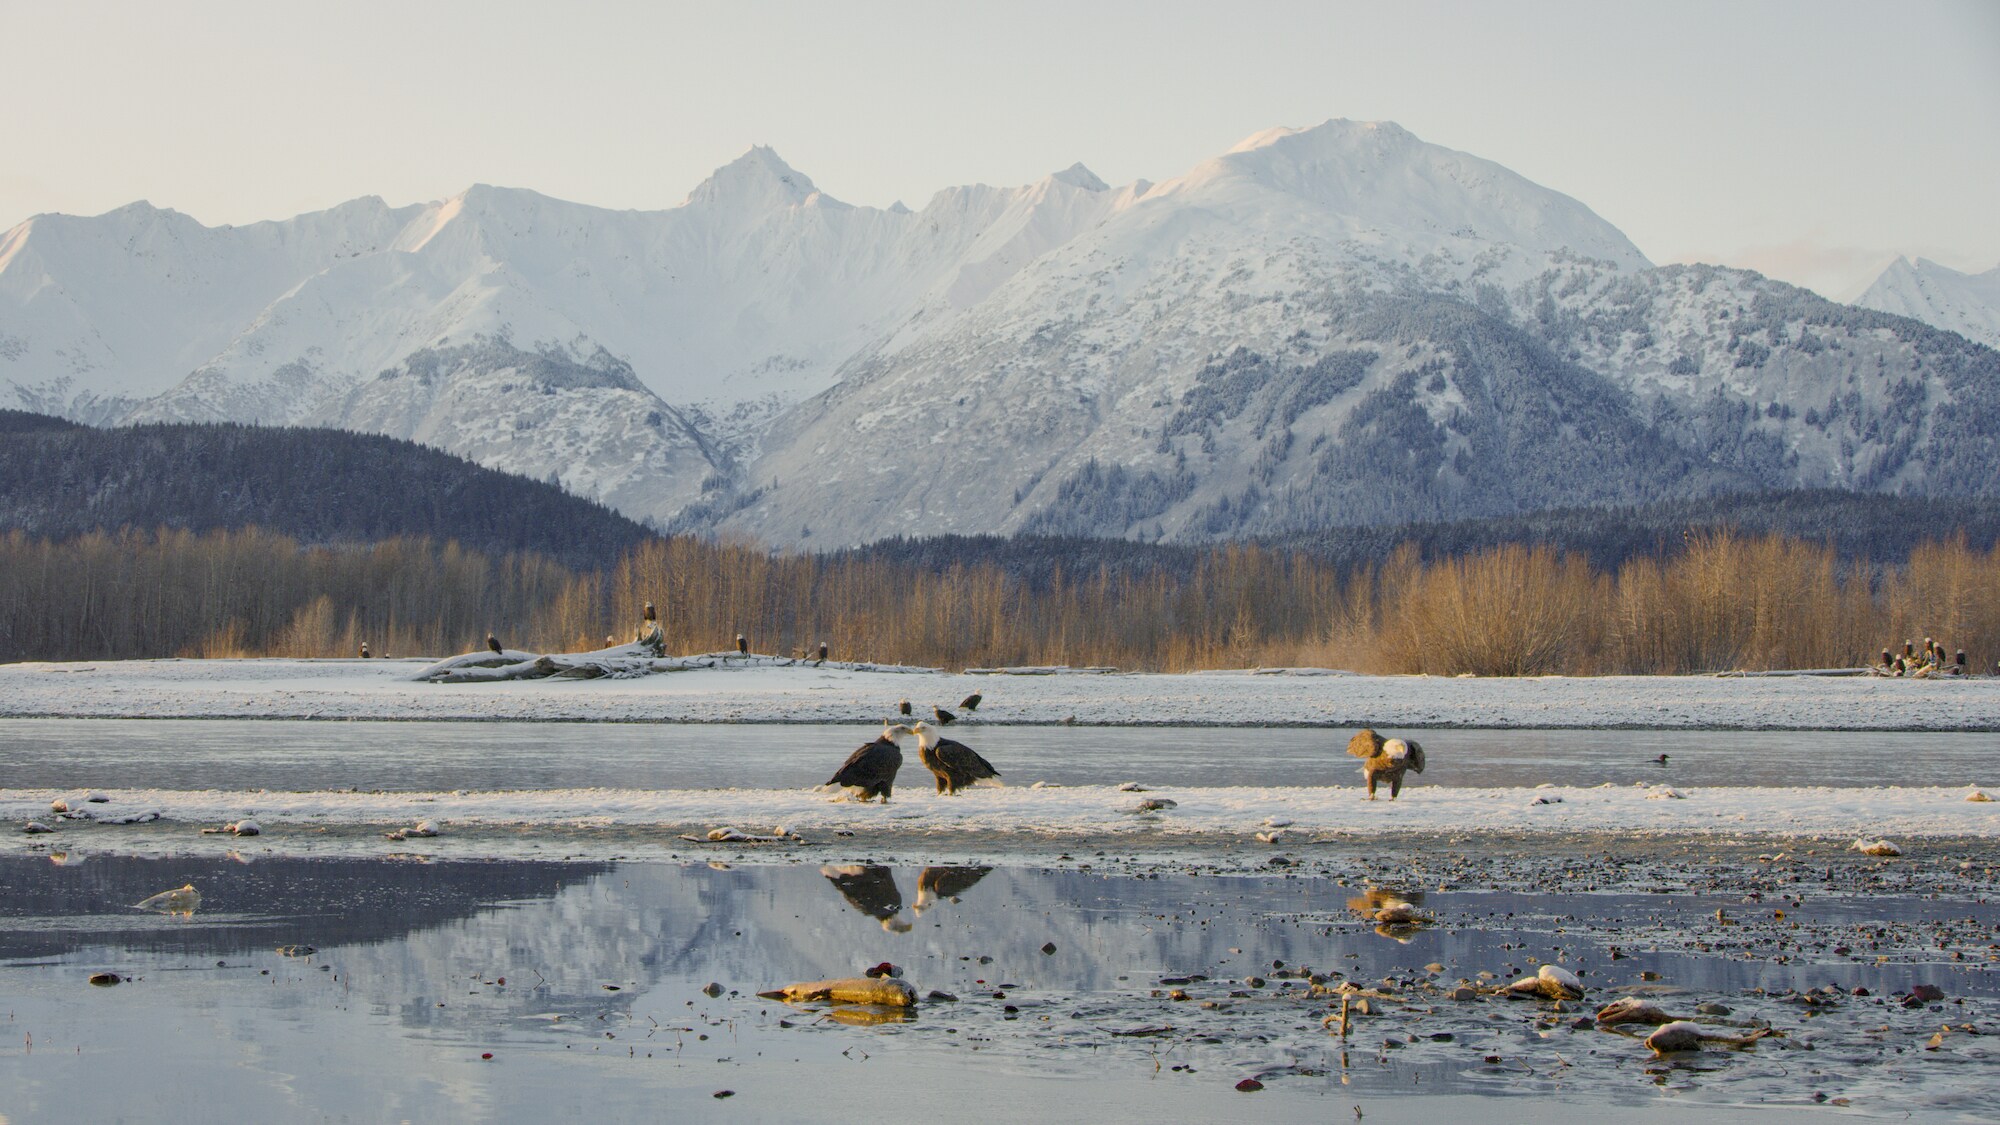 Bald eagles congregate along the banks of the  Chilkat River, the largest gathering of their kind in the world. Geothermal upwellings prevent the river from freezing until later in the season. (National Geographic for Disney+)